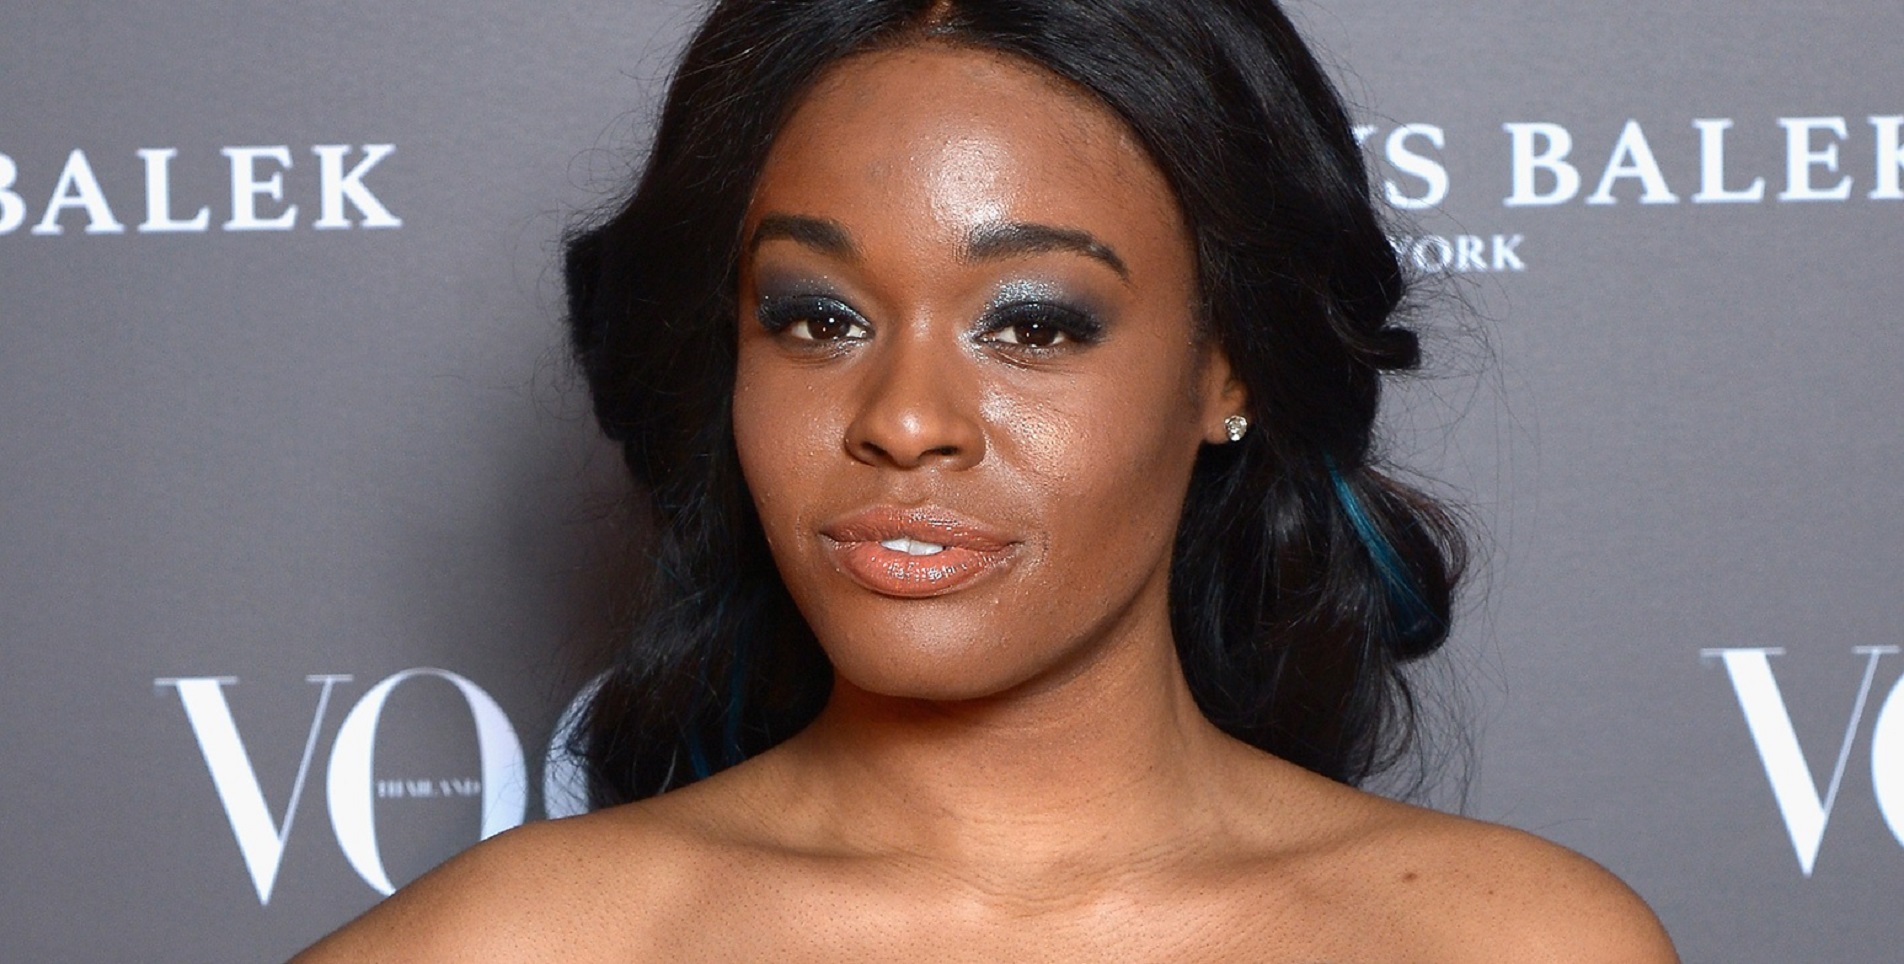 Too Soon? Azealia Banks Cancels Retirement and Announces New Music!